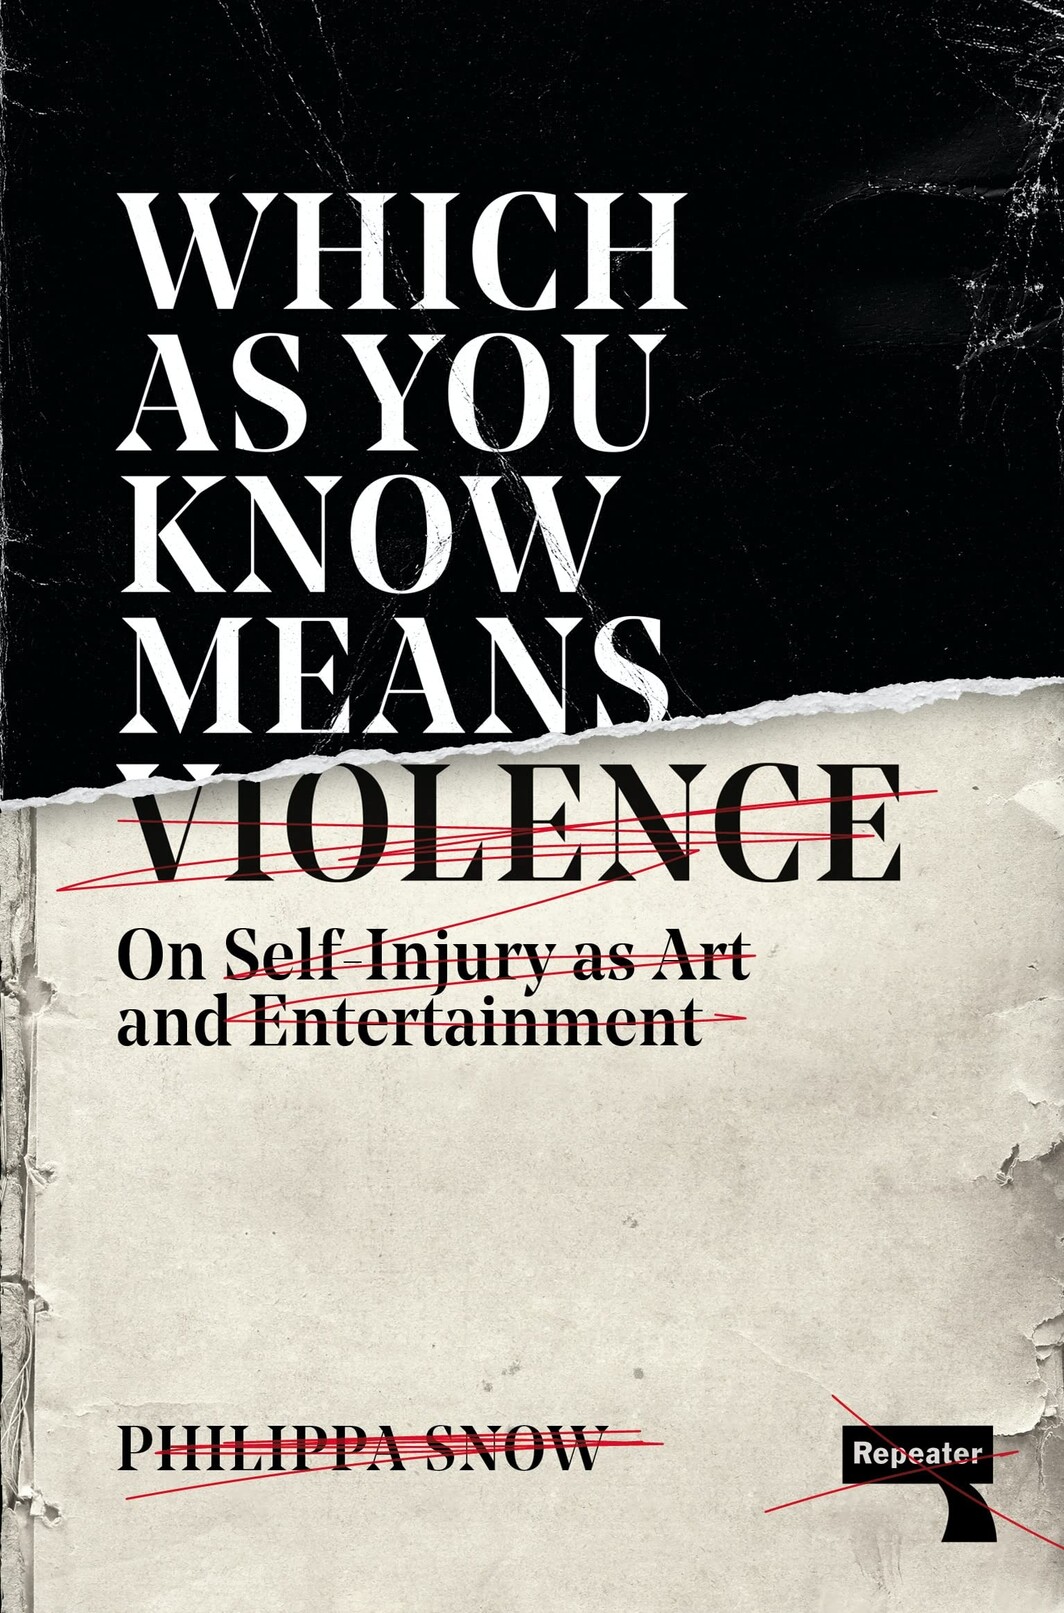 The cover of Which as You Know Means Violence: On Self-Injury as Art and Entertainment